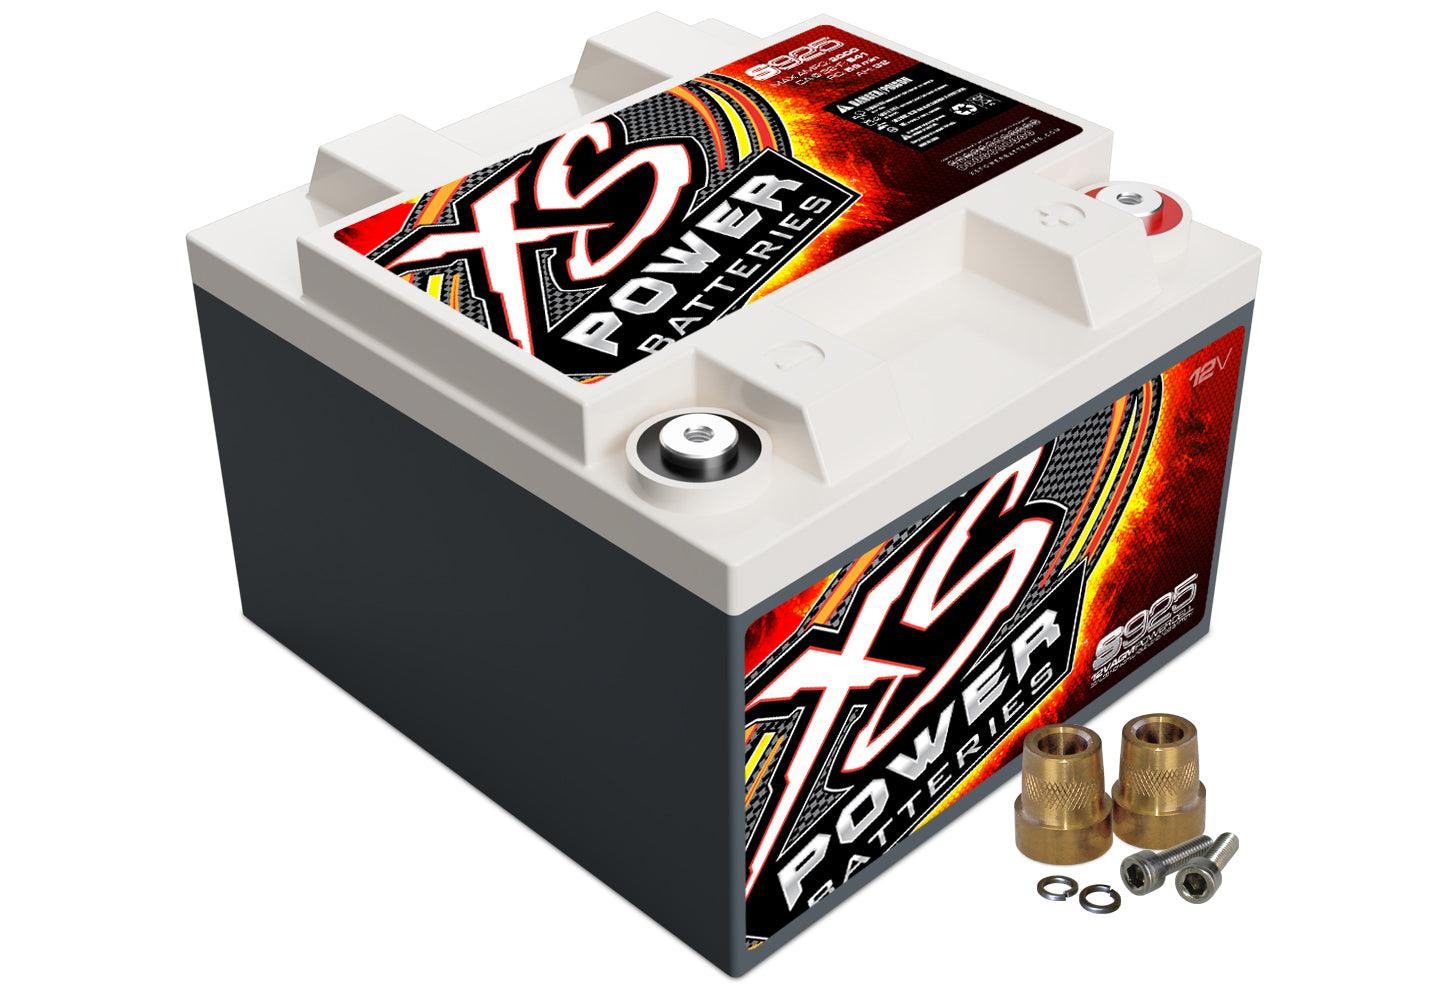 XS Power AGM Battery 12V 550A CA - Burlile Performance Products